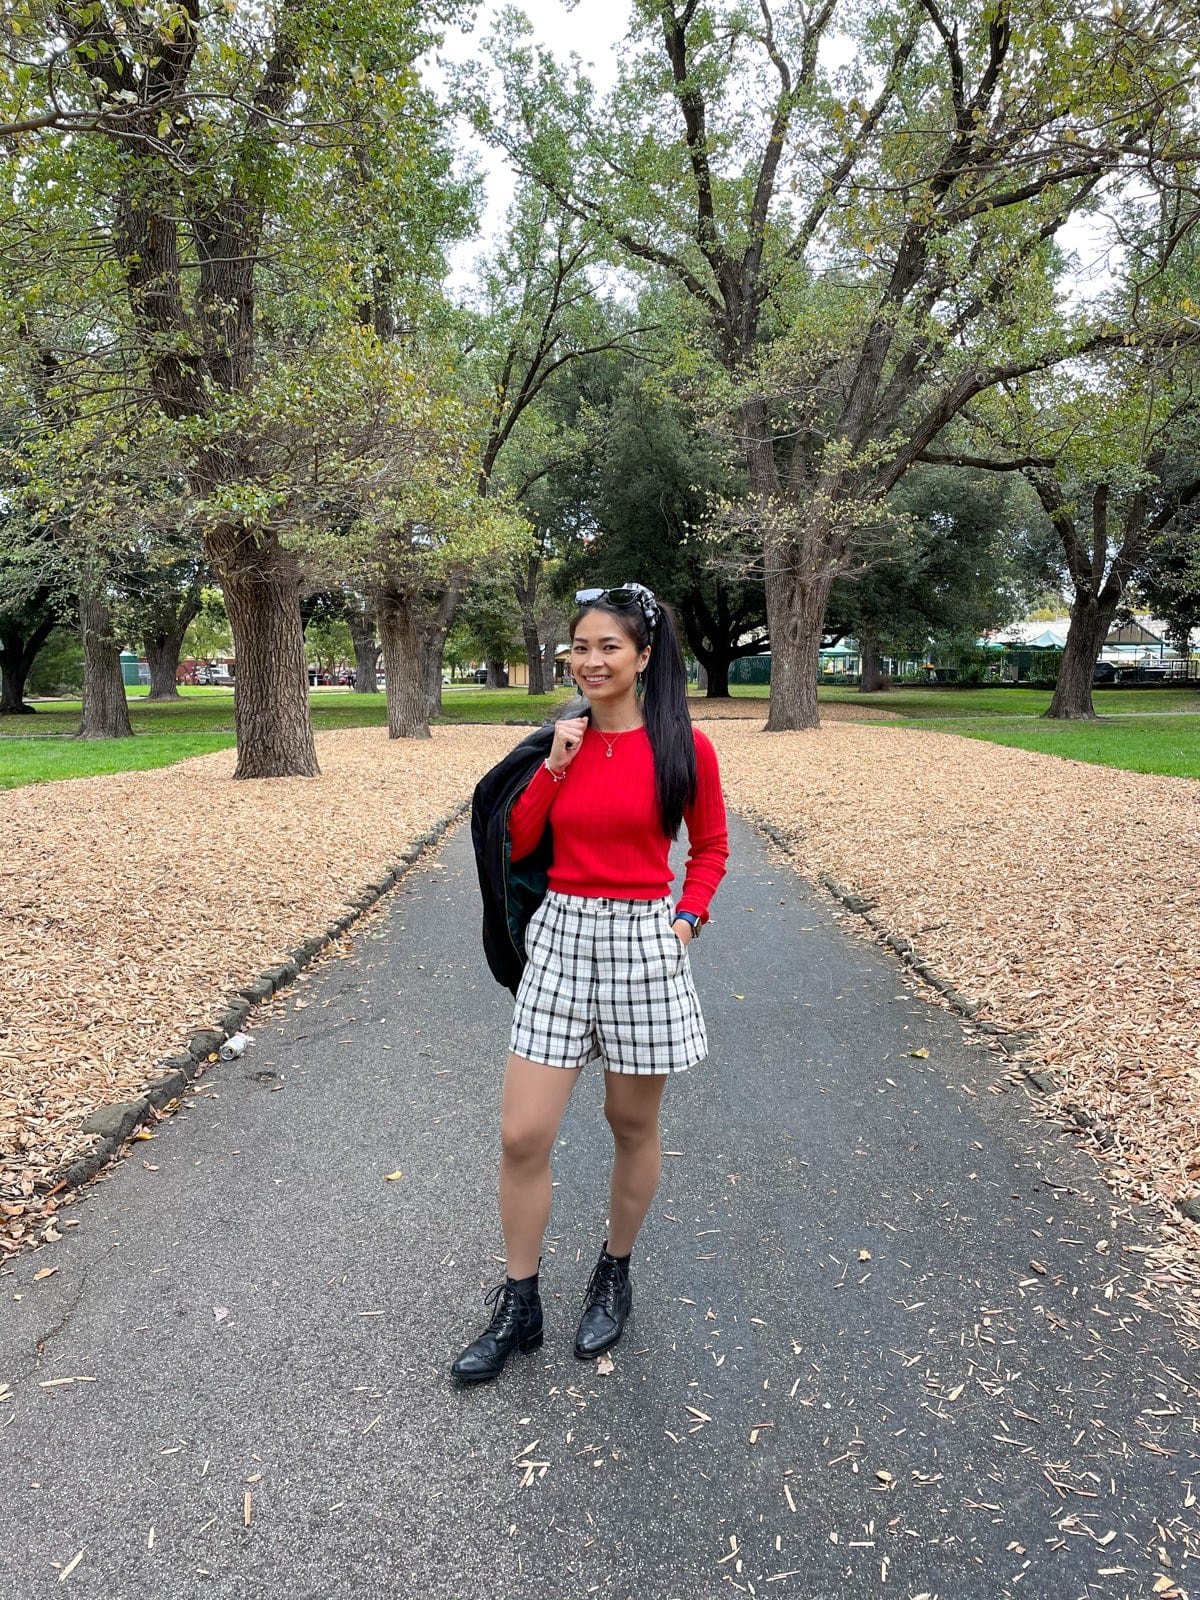 An Asian woman standing in a park with a concrete path going between planted trees. She has her long dark hair tied in a ponytail and a black-and-white gingham scrunchie. She is wearing a long sleeved red top, black-and-white checkered shorts, and black lace-up boots.